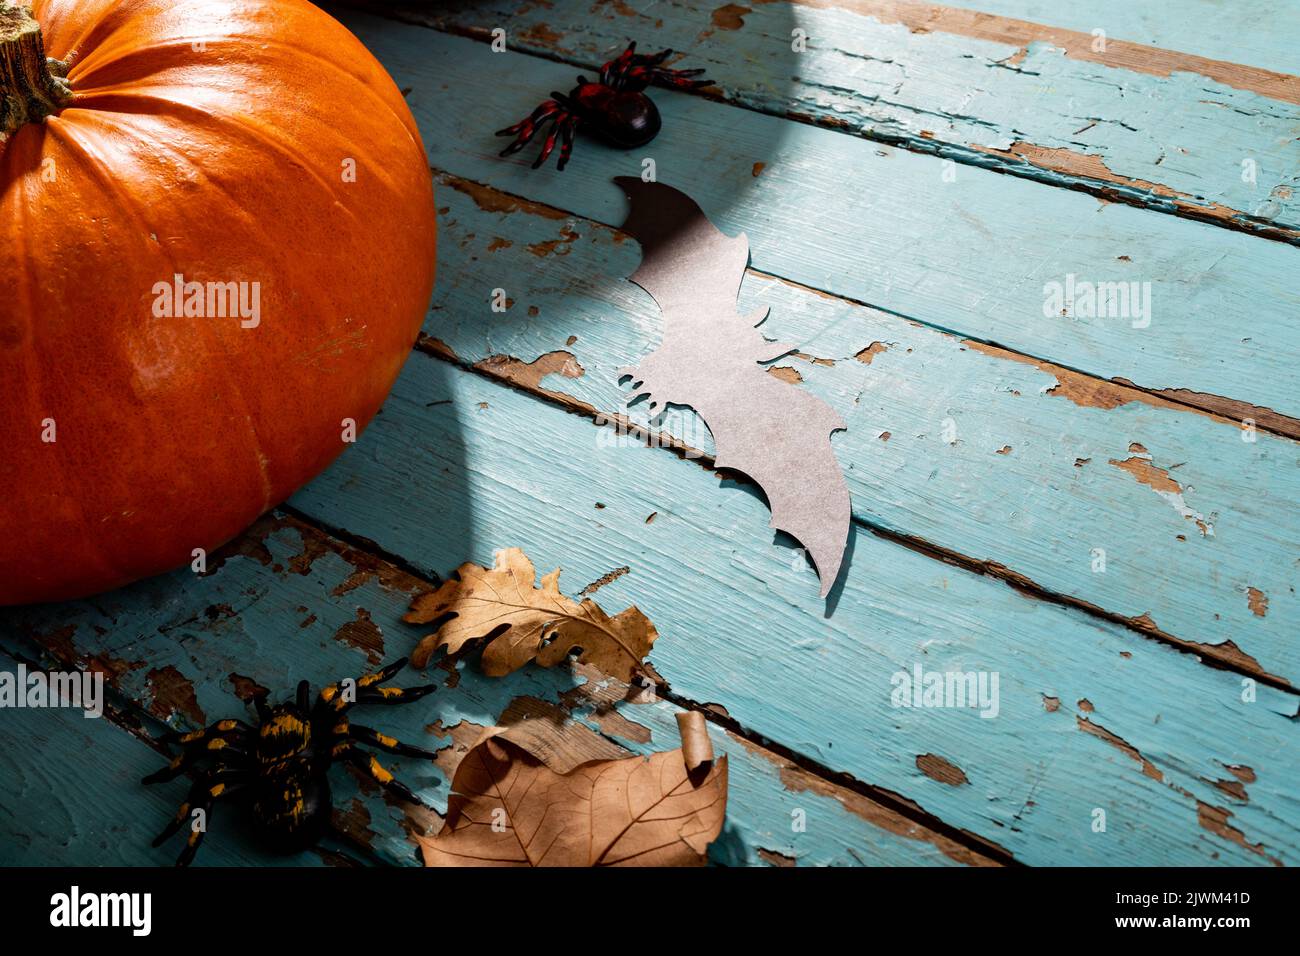 Pumpkin, spider and bat toys with copy space on blue wooden surface Stock Photo